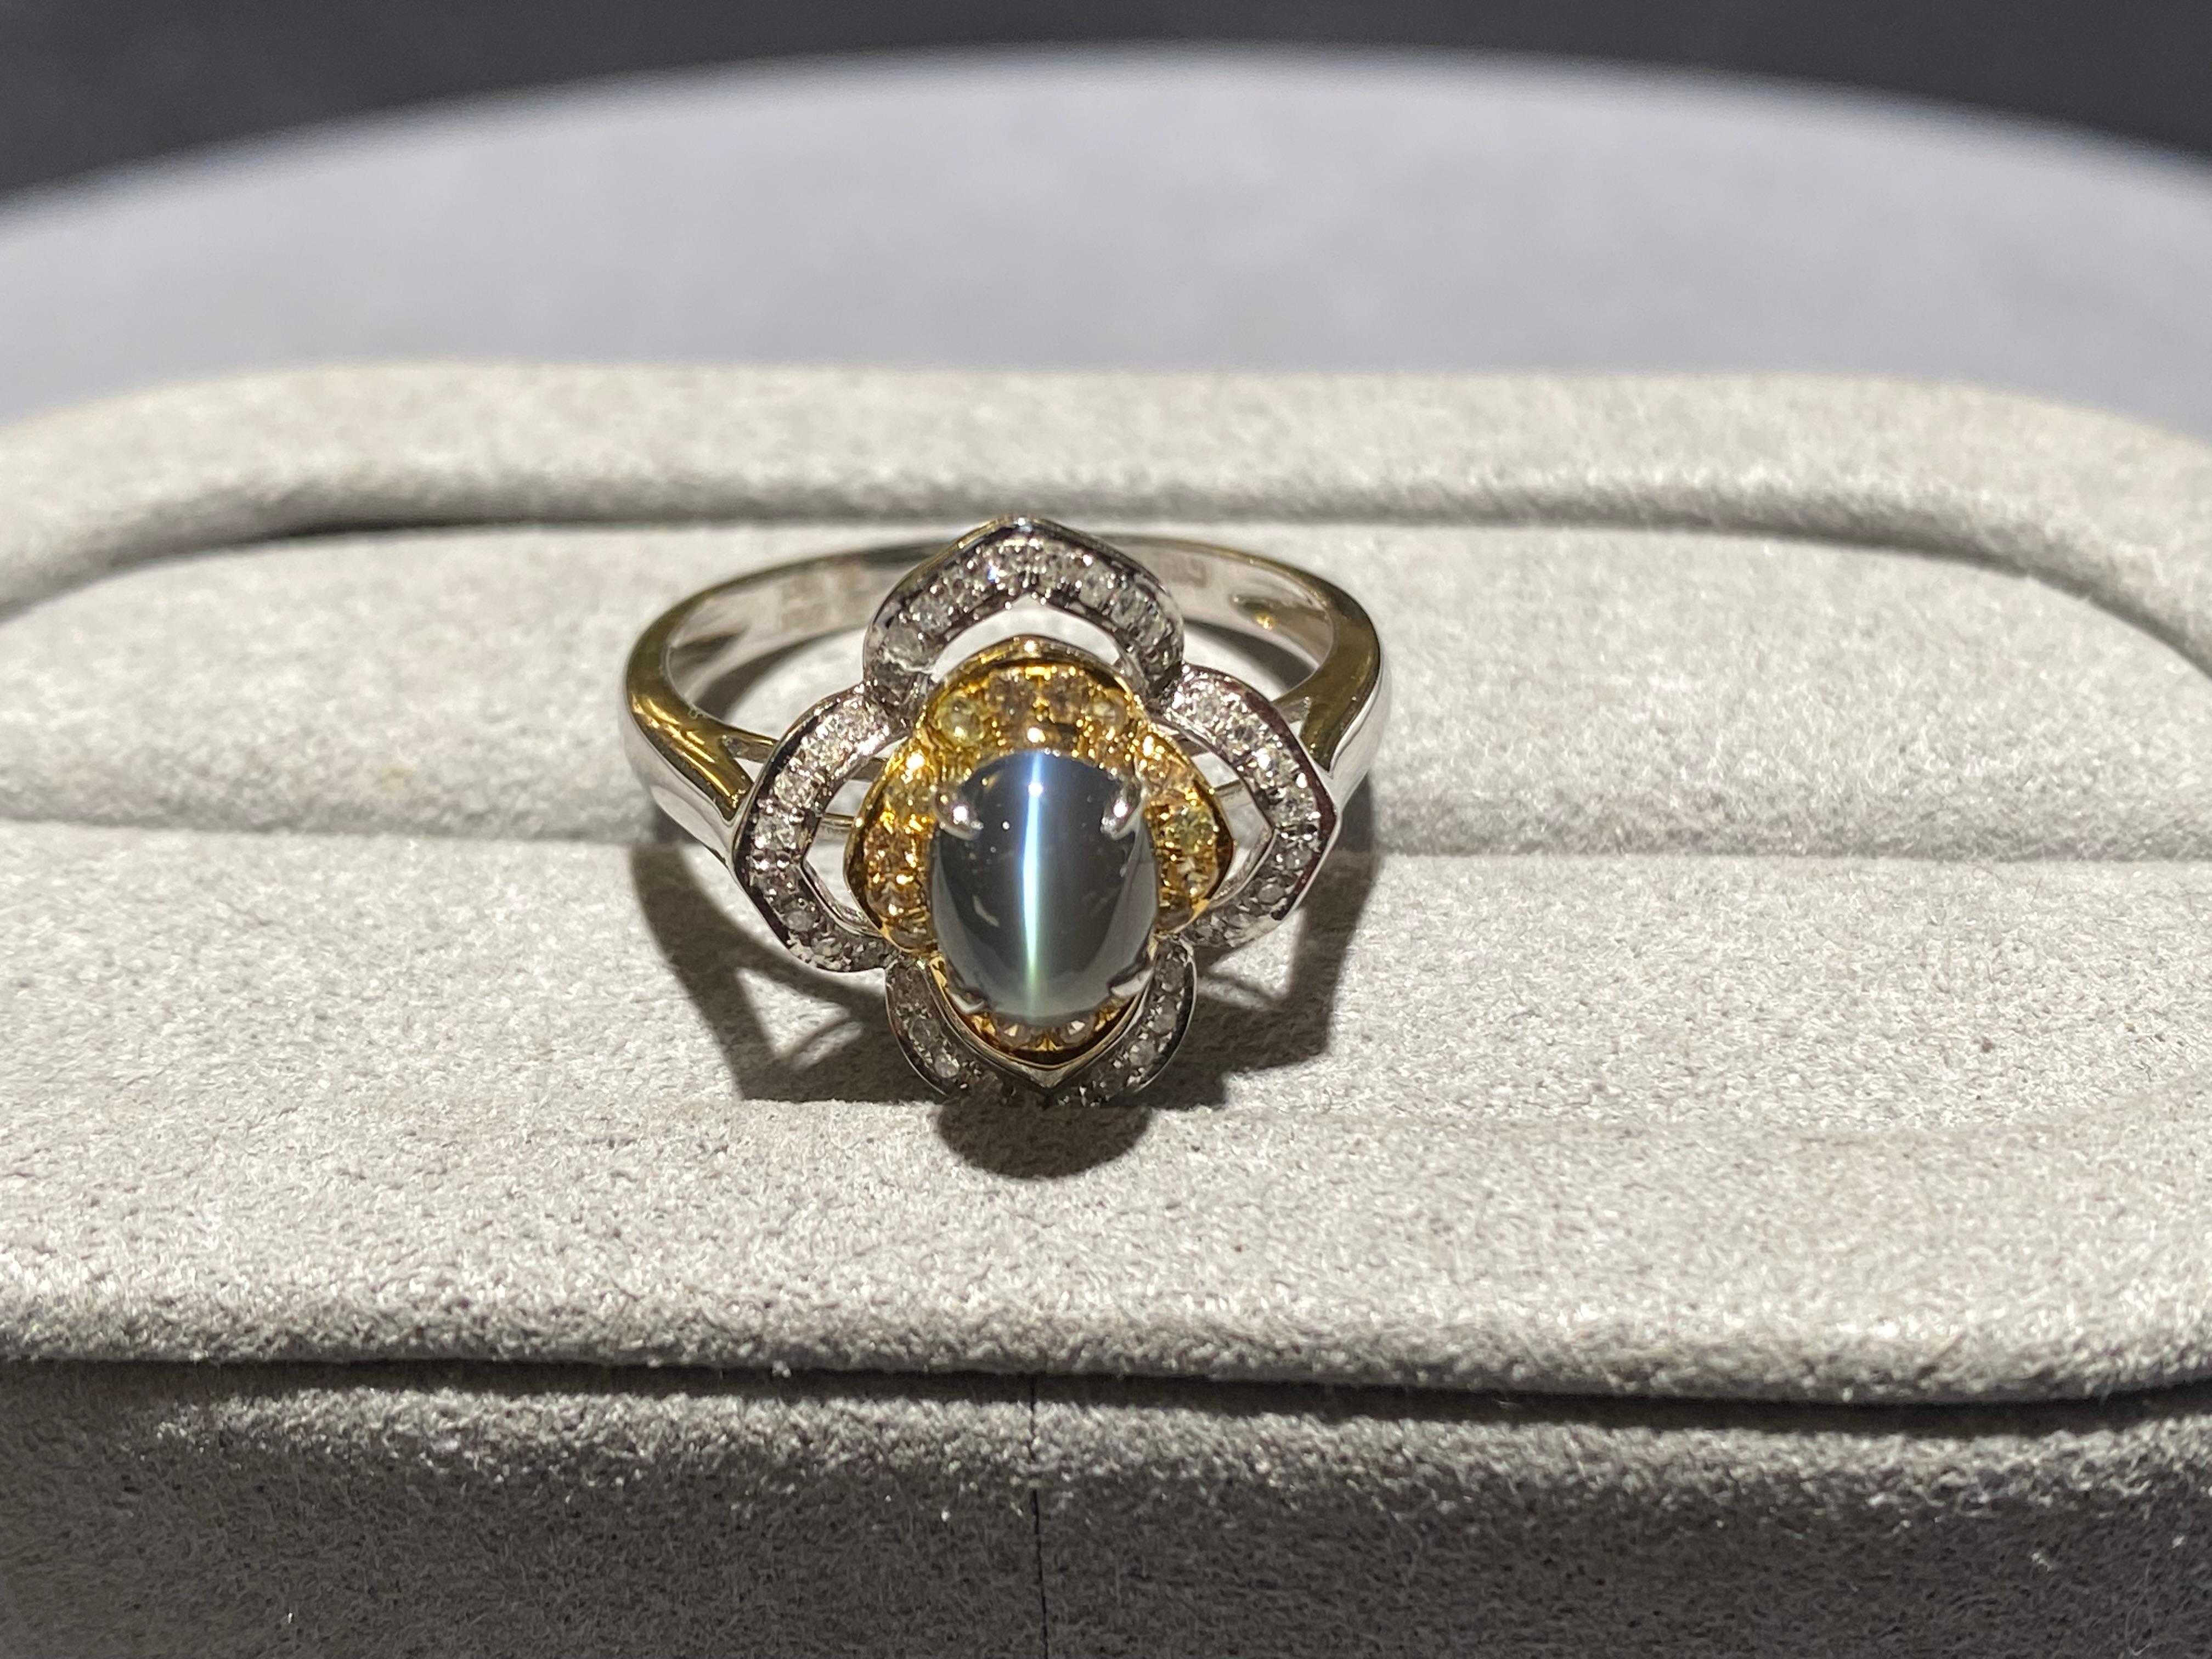 A 1.27 ct Alexandrite Cat's Eye and Diamond Ring in 18k White Gold. The Alexandrite is surrounded by 2 layers of diamond pave. The inner circle diamonds are set on a yellow gold and the oter layer of diamonds are set on white gold. The design looks